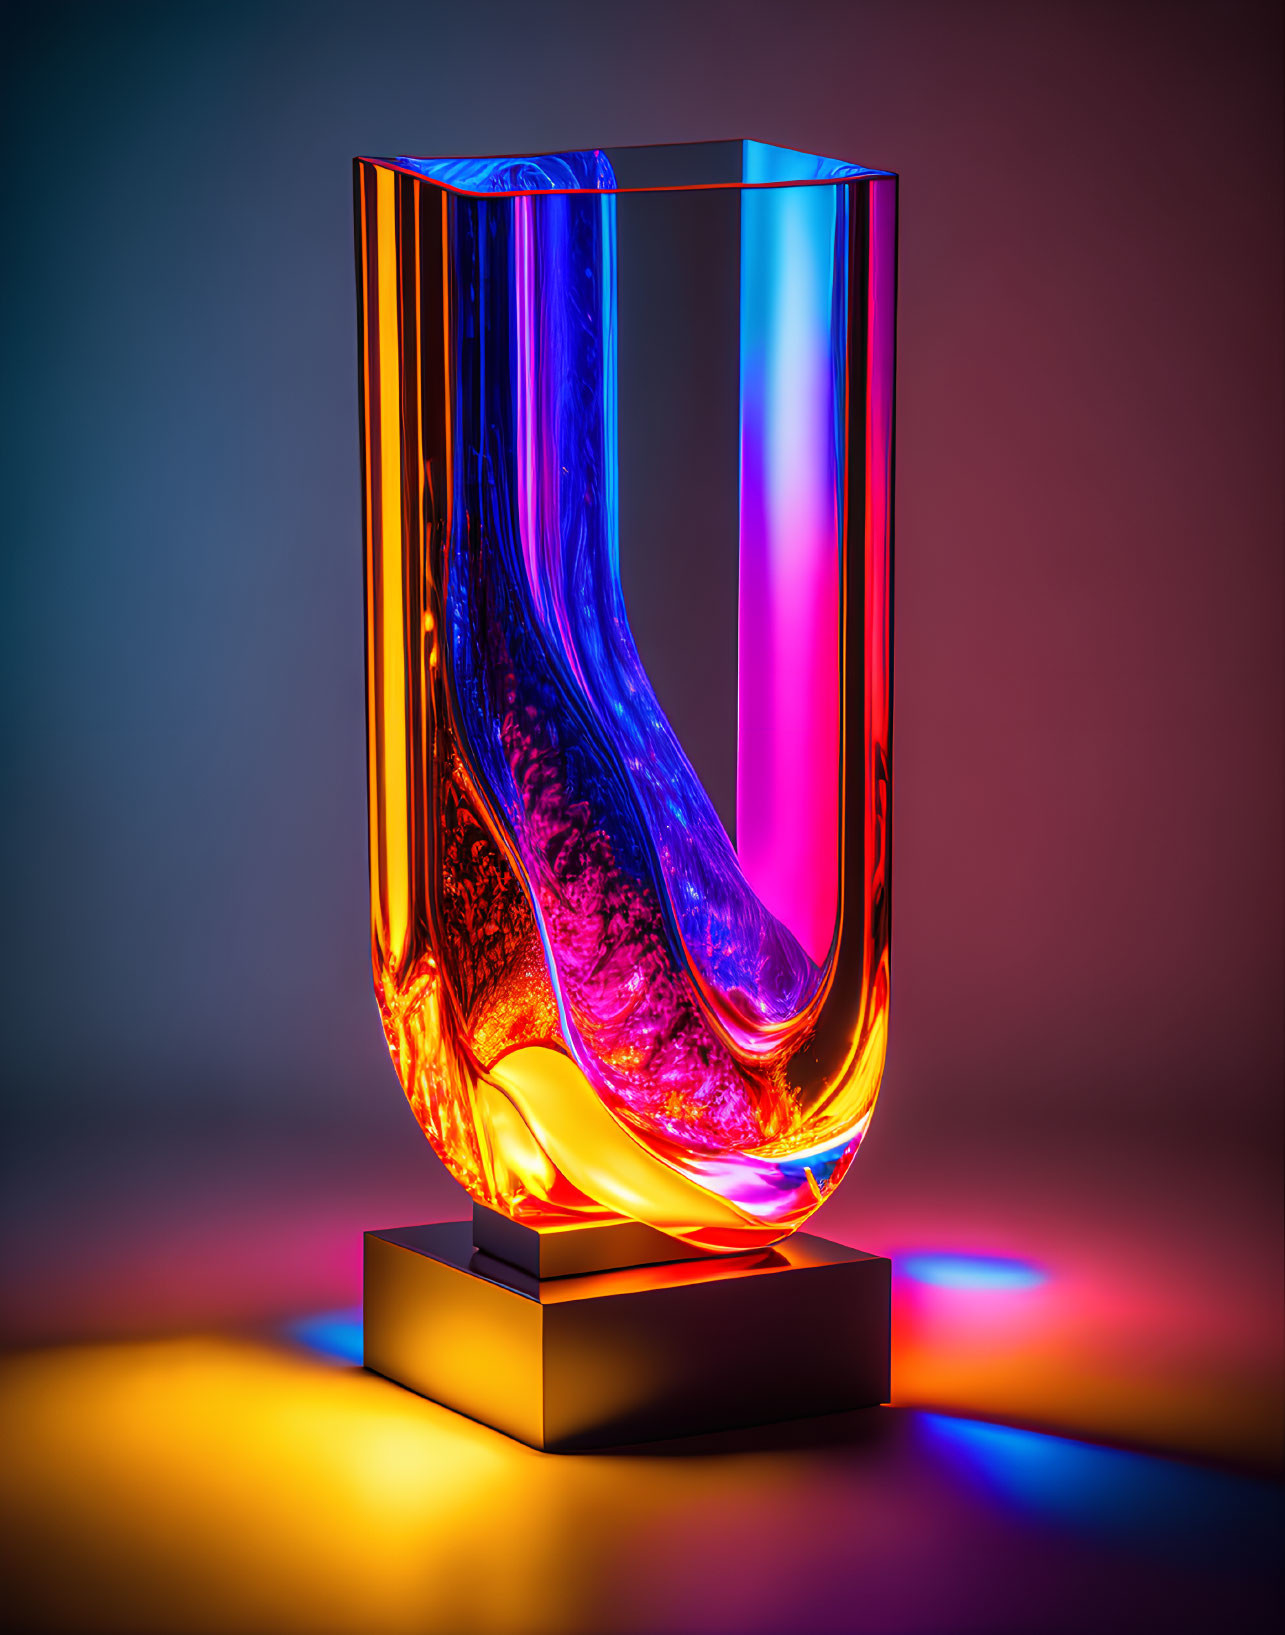 Twisted glass sculpture illuminated with neon colors on reflective surface